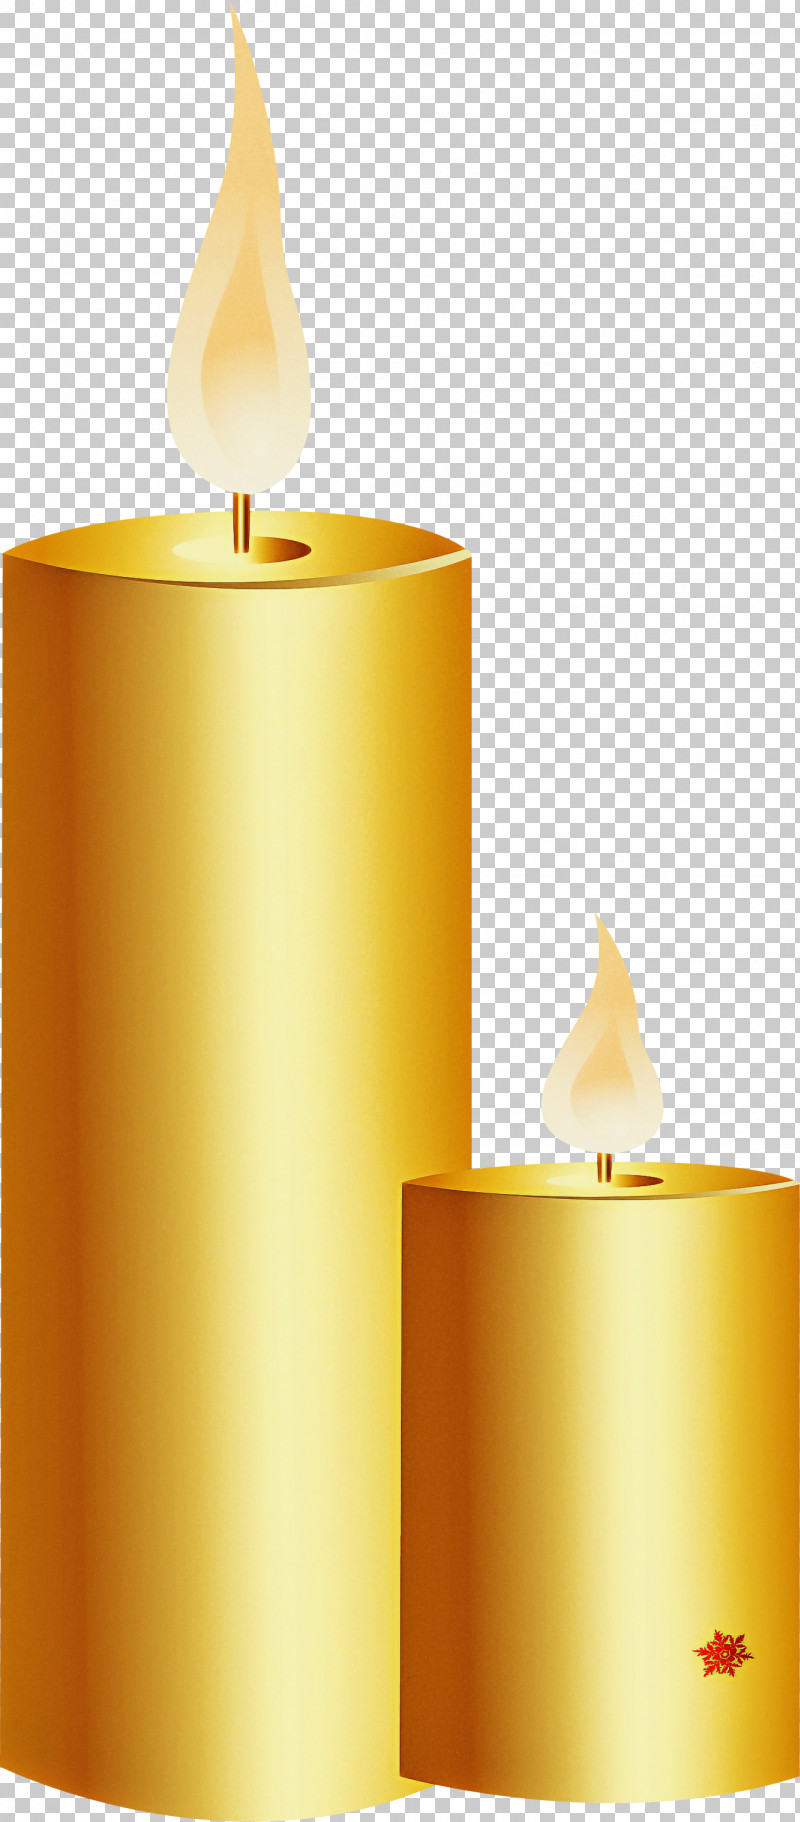 Candle Lighting Wax Yellow Cylinder PNG, Clipart, Candle, Cylinder, Flame, Flameless Candle, Interior Design Free PNG Download